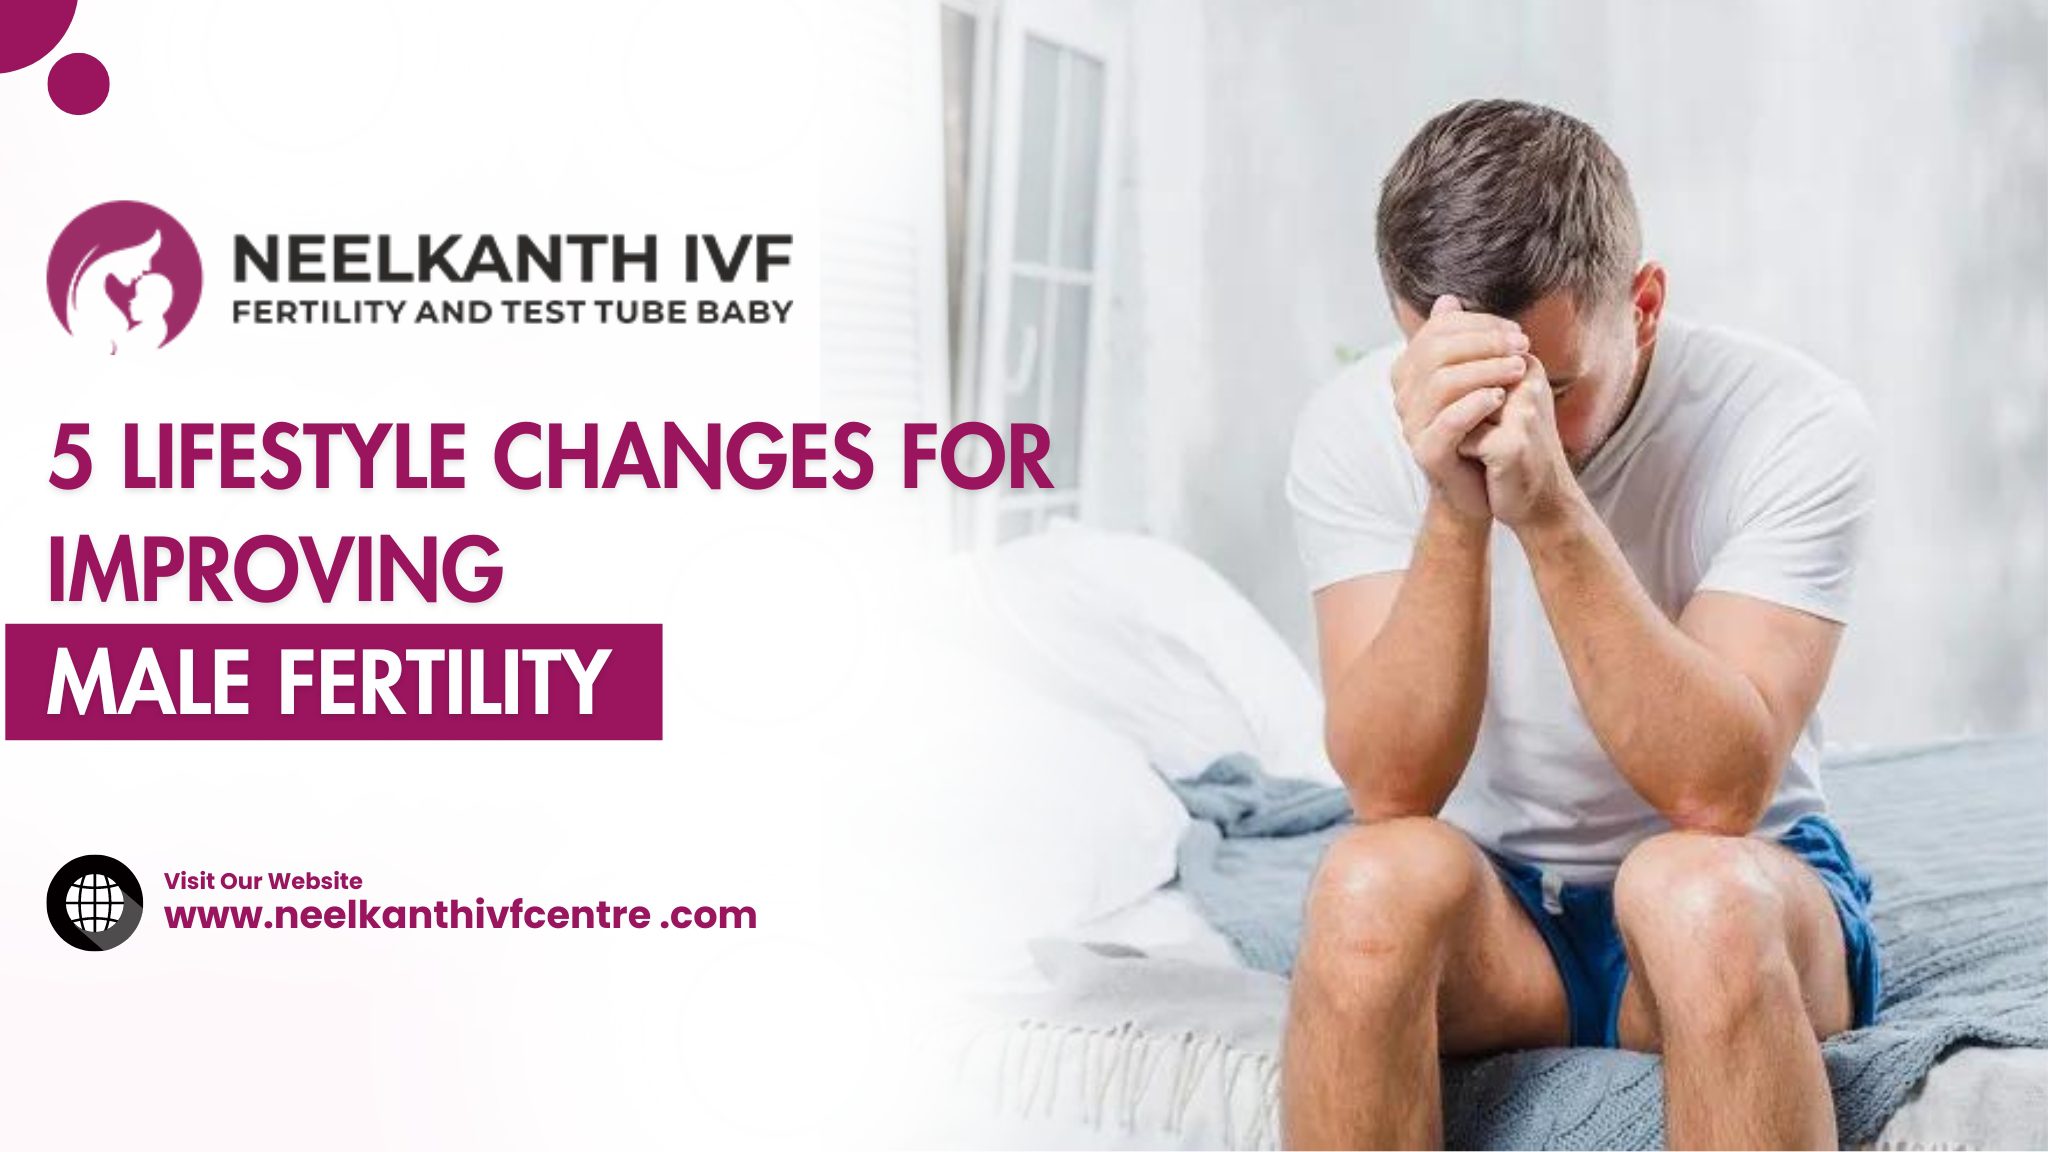 5 Lifestyle Changes For Improving Male Fertility